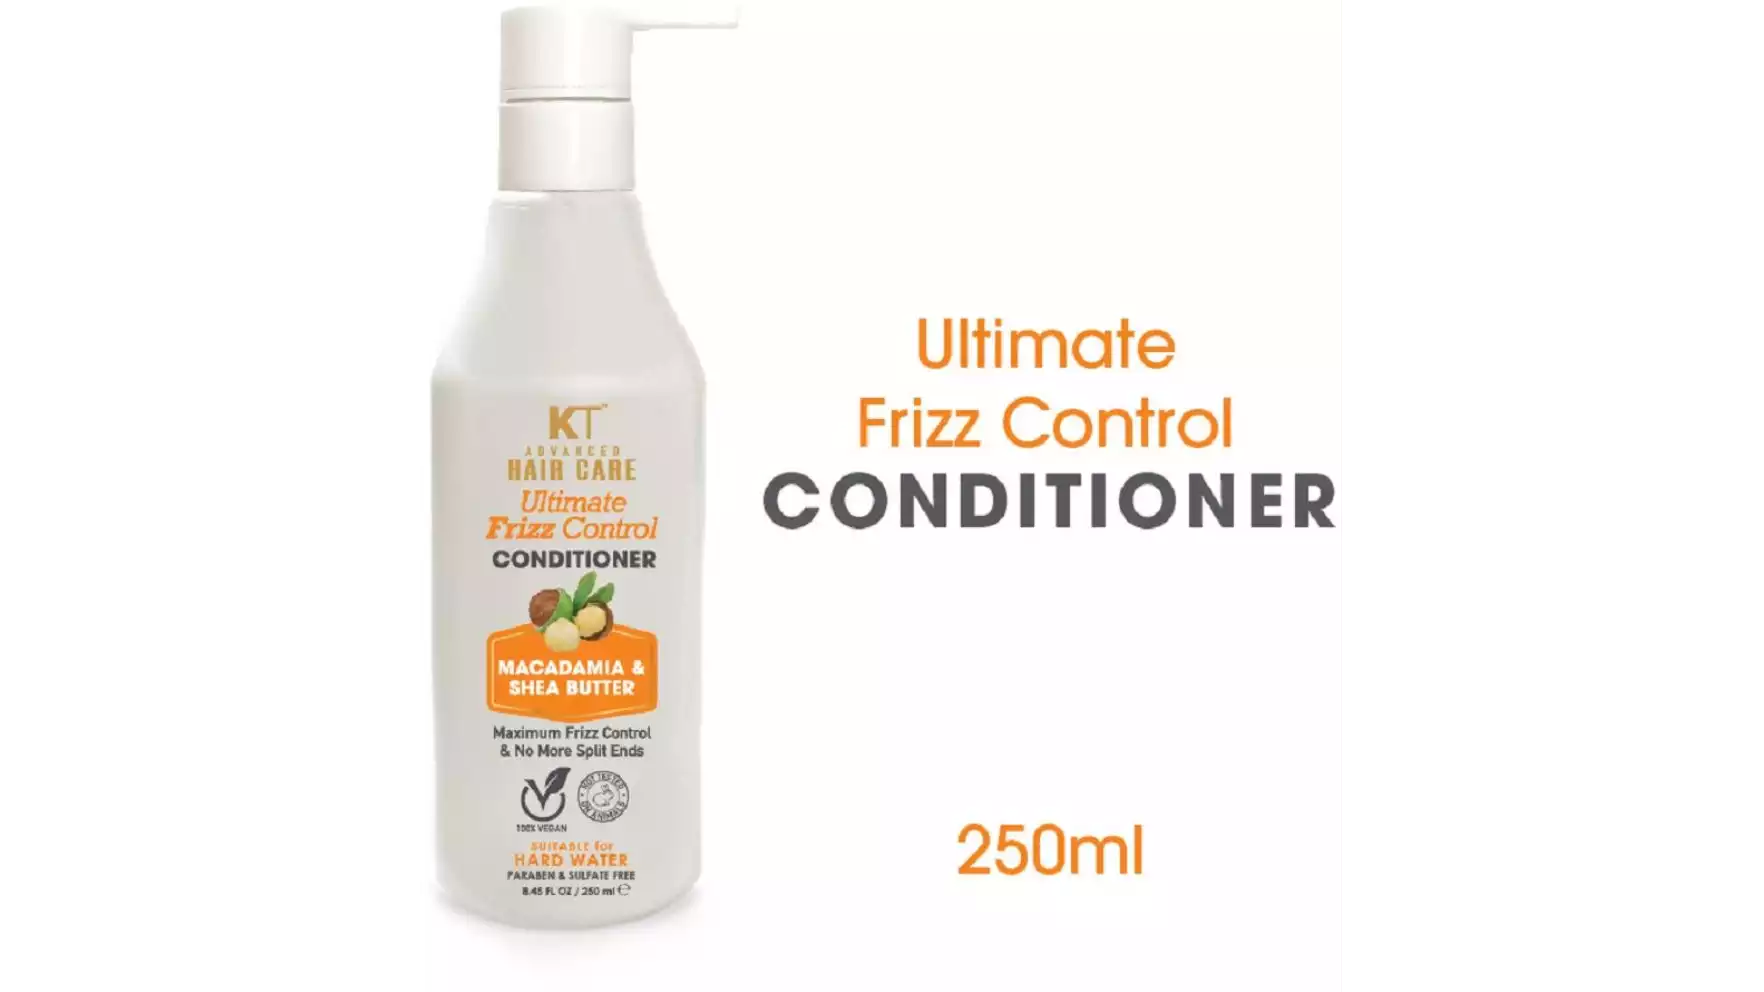 KT Hair Care Ultimate Frizz Control Conditioner (250ml)